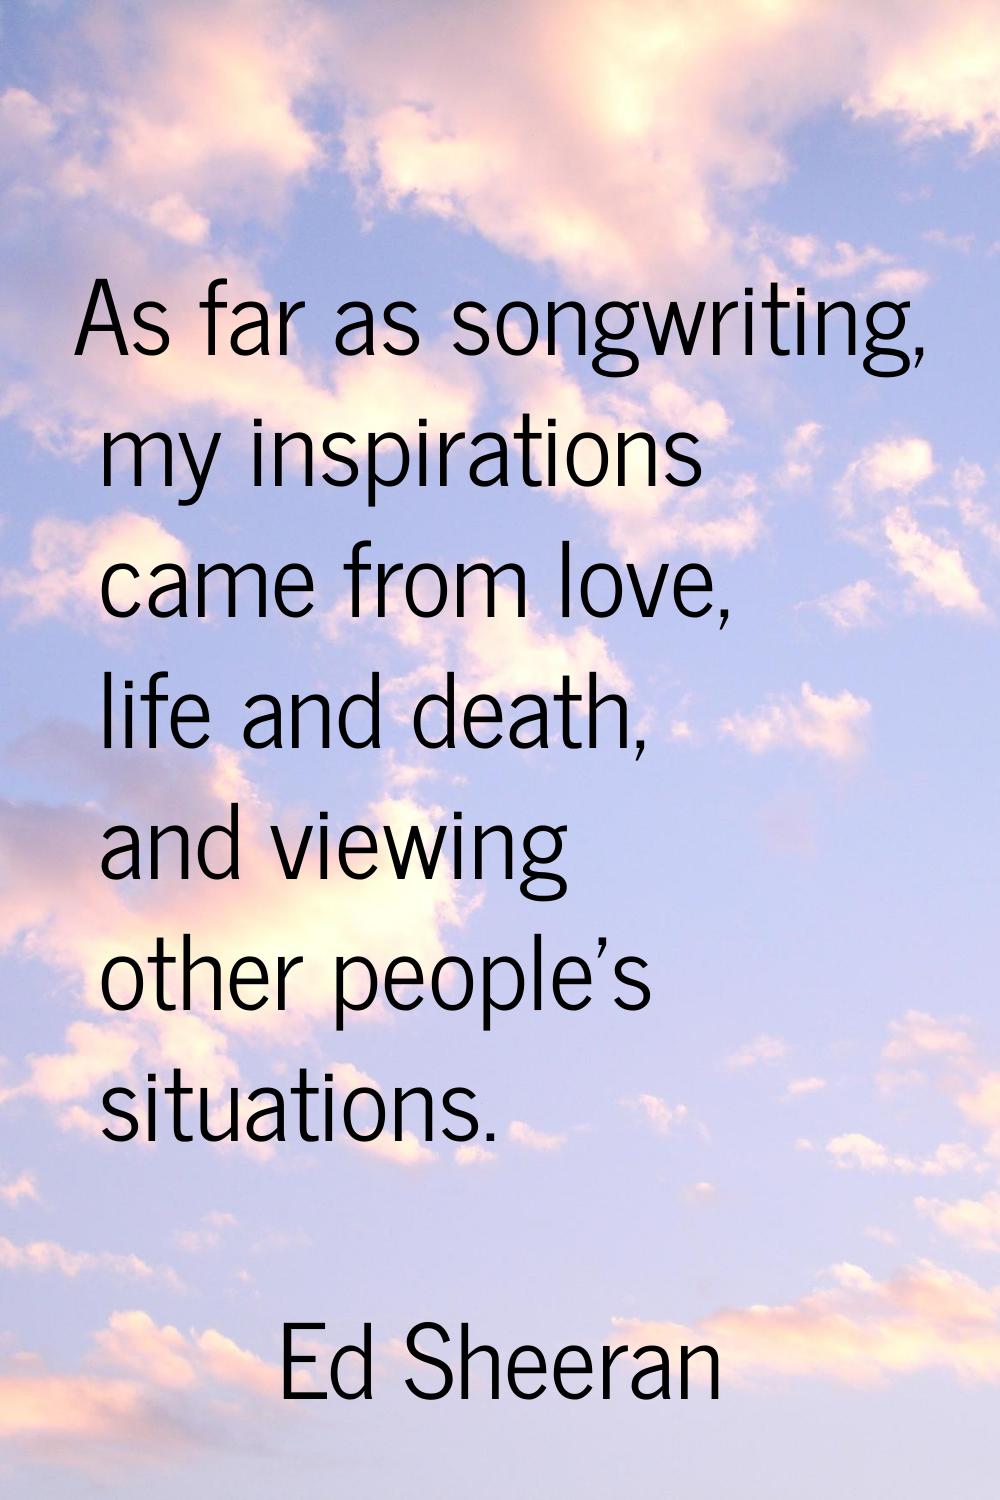 As far as songwriting, my inspirations came from love, life and death, and viewing other people's s